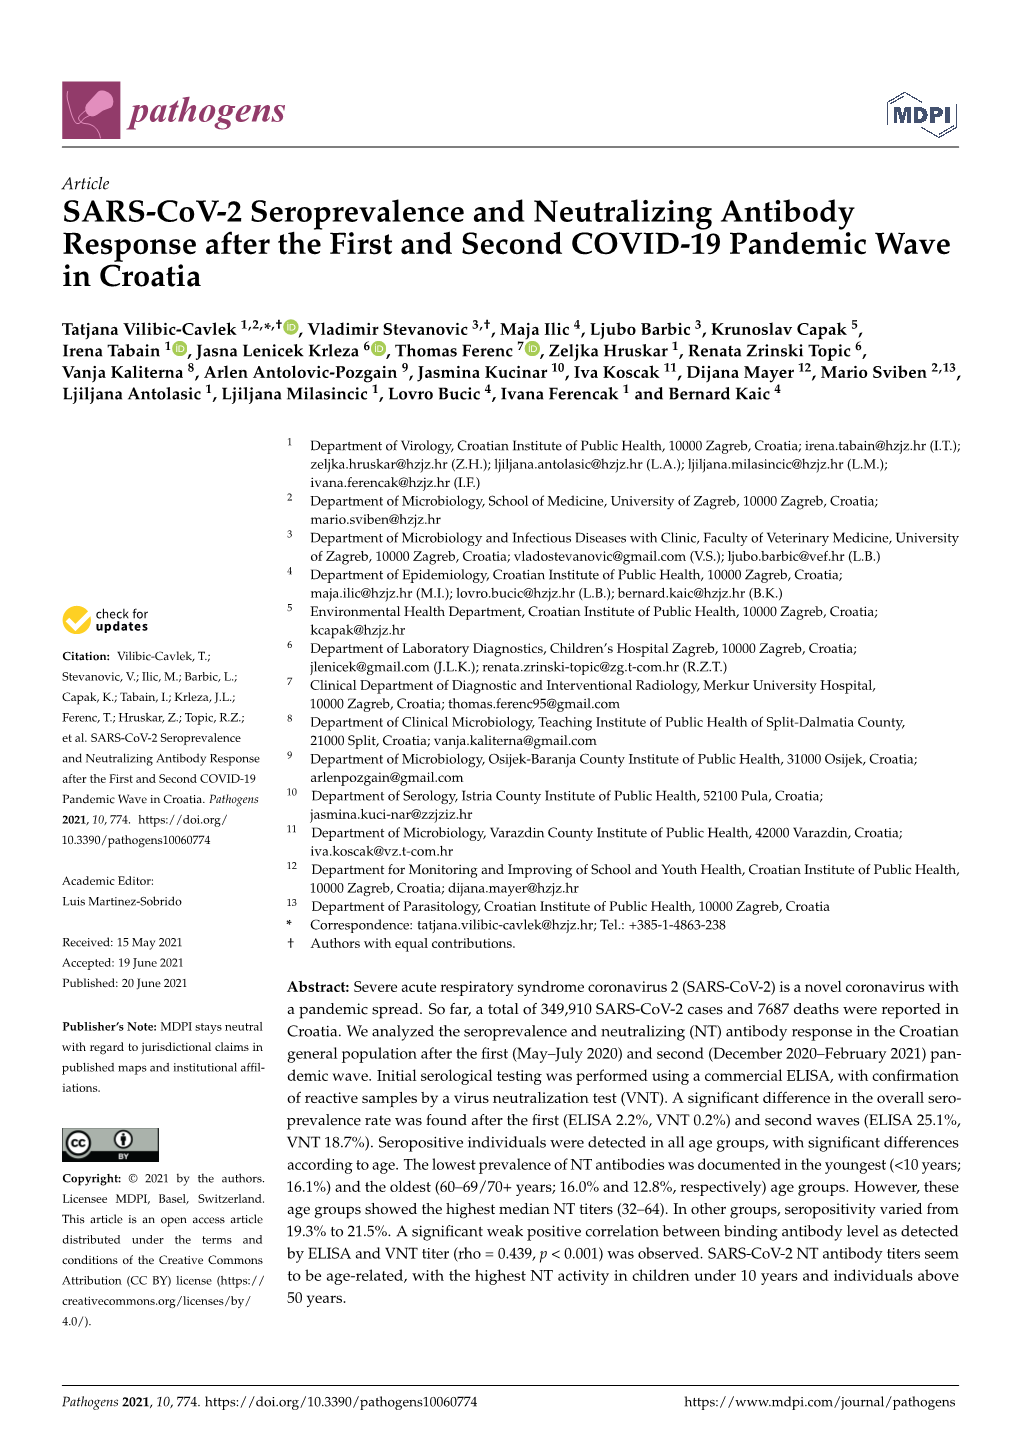 SARS-Cov-2 Seroprevalence and Neutralizing Antibody Response After the First and Second COVID-19 Pandemic Wave in Croatia